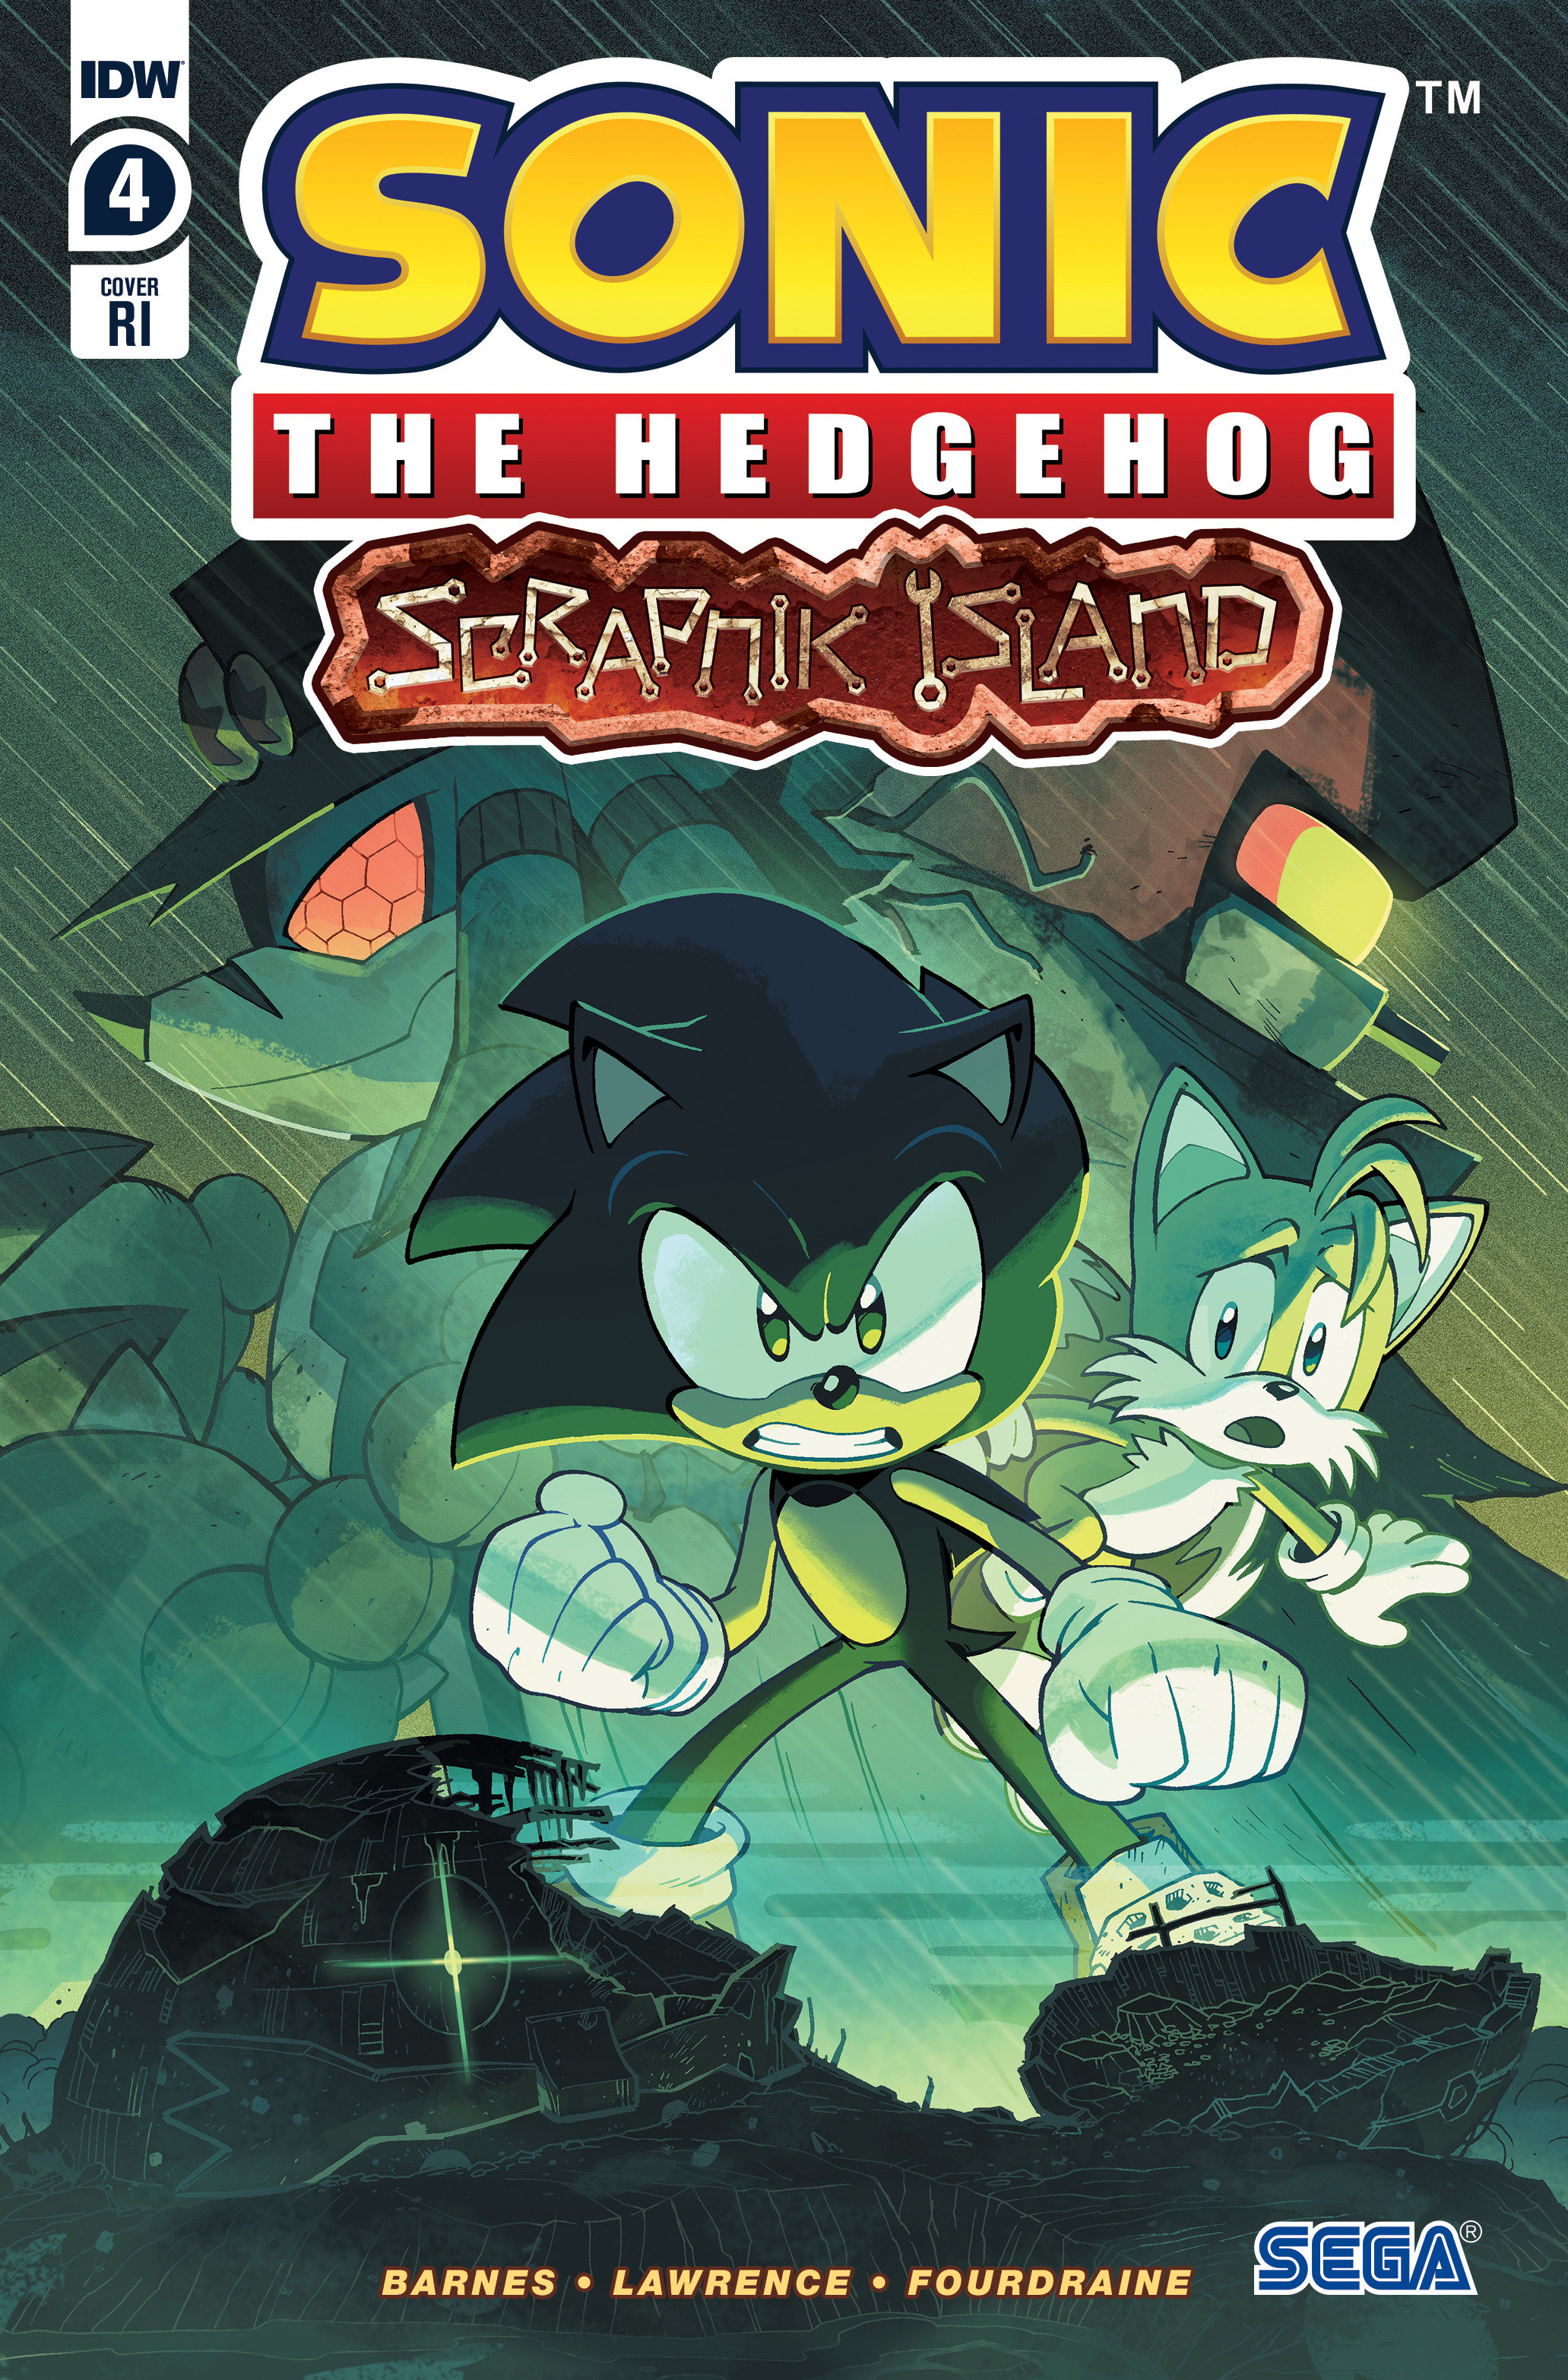 Sonic the Hedgehog Scrapnik Island #4 Cover C 1 for 10 Incentive